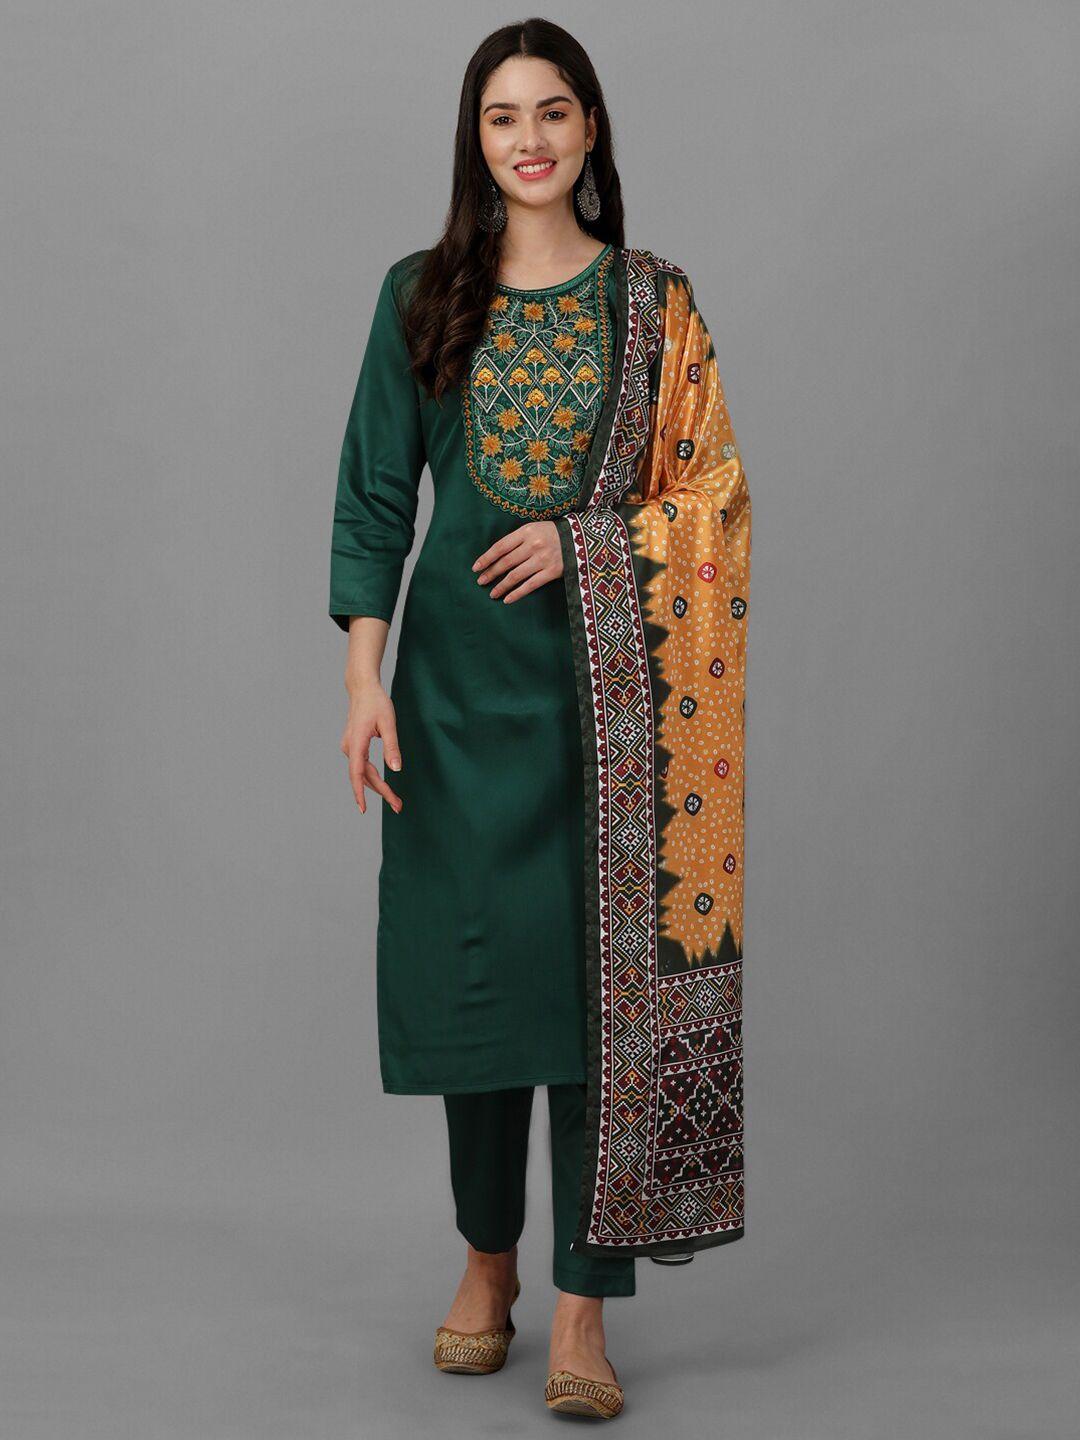 nivah fashion green & mustard embroidered satin unstitched dress material